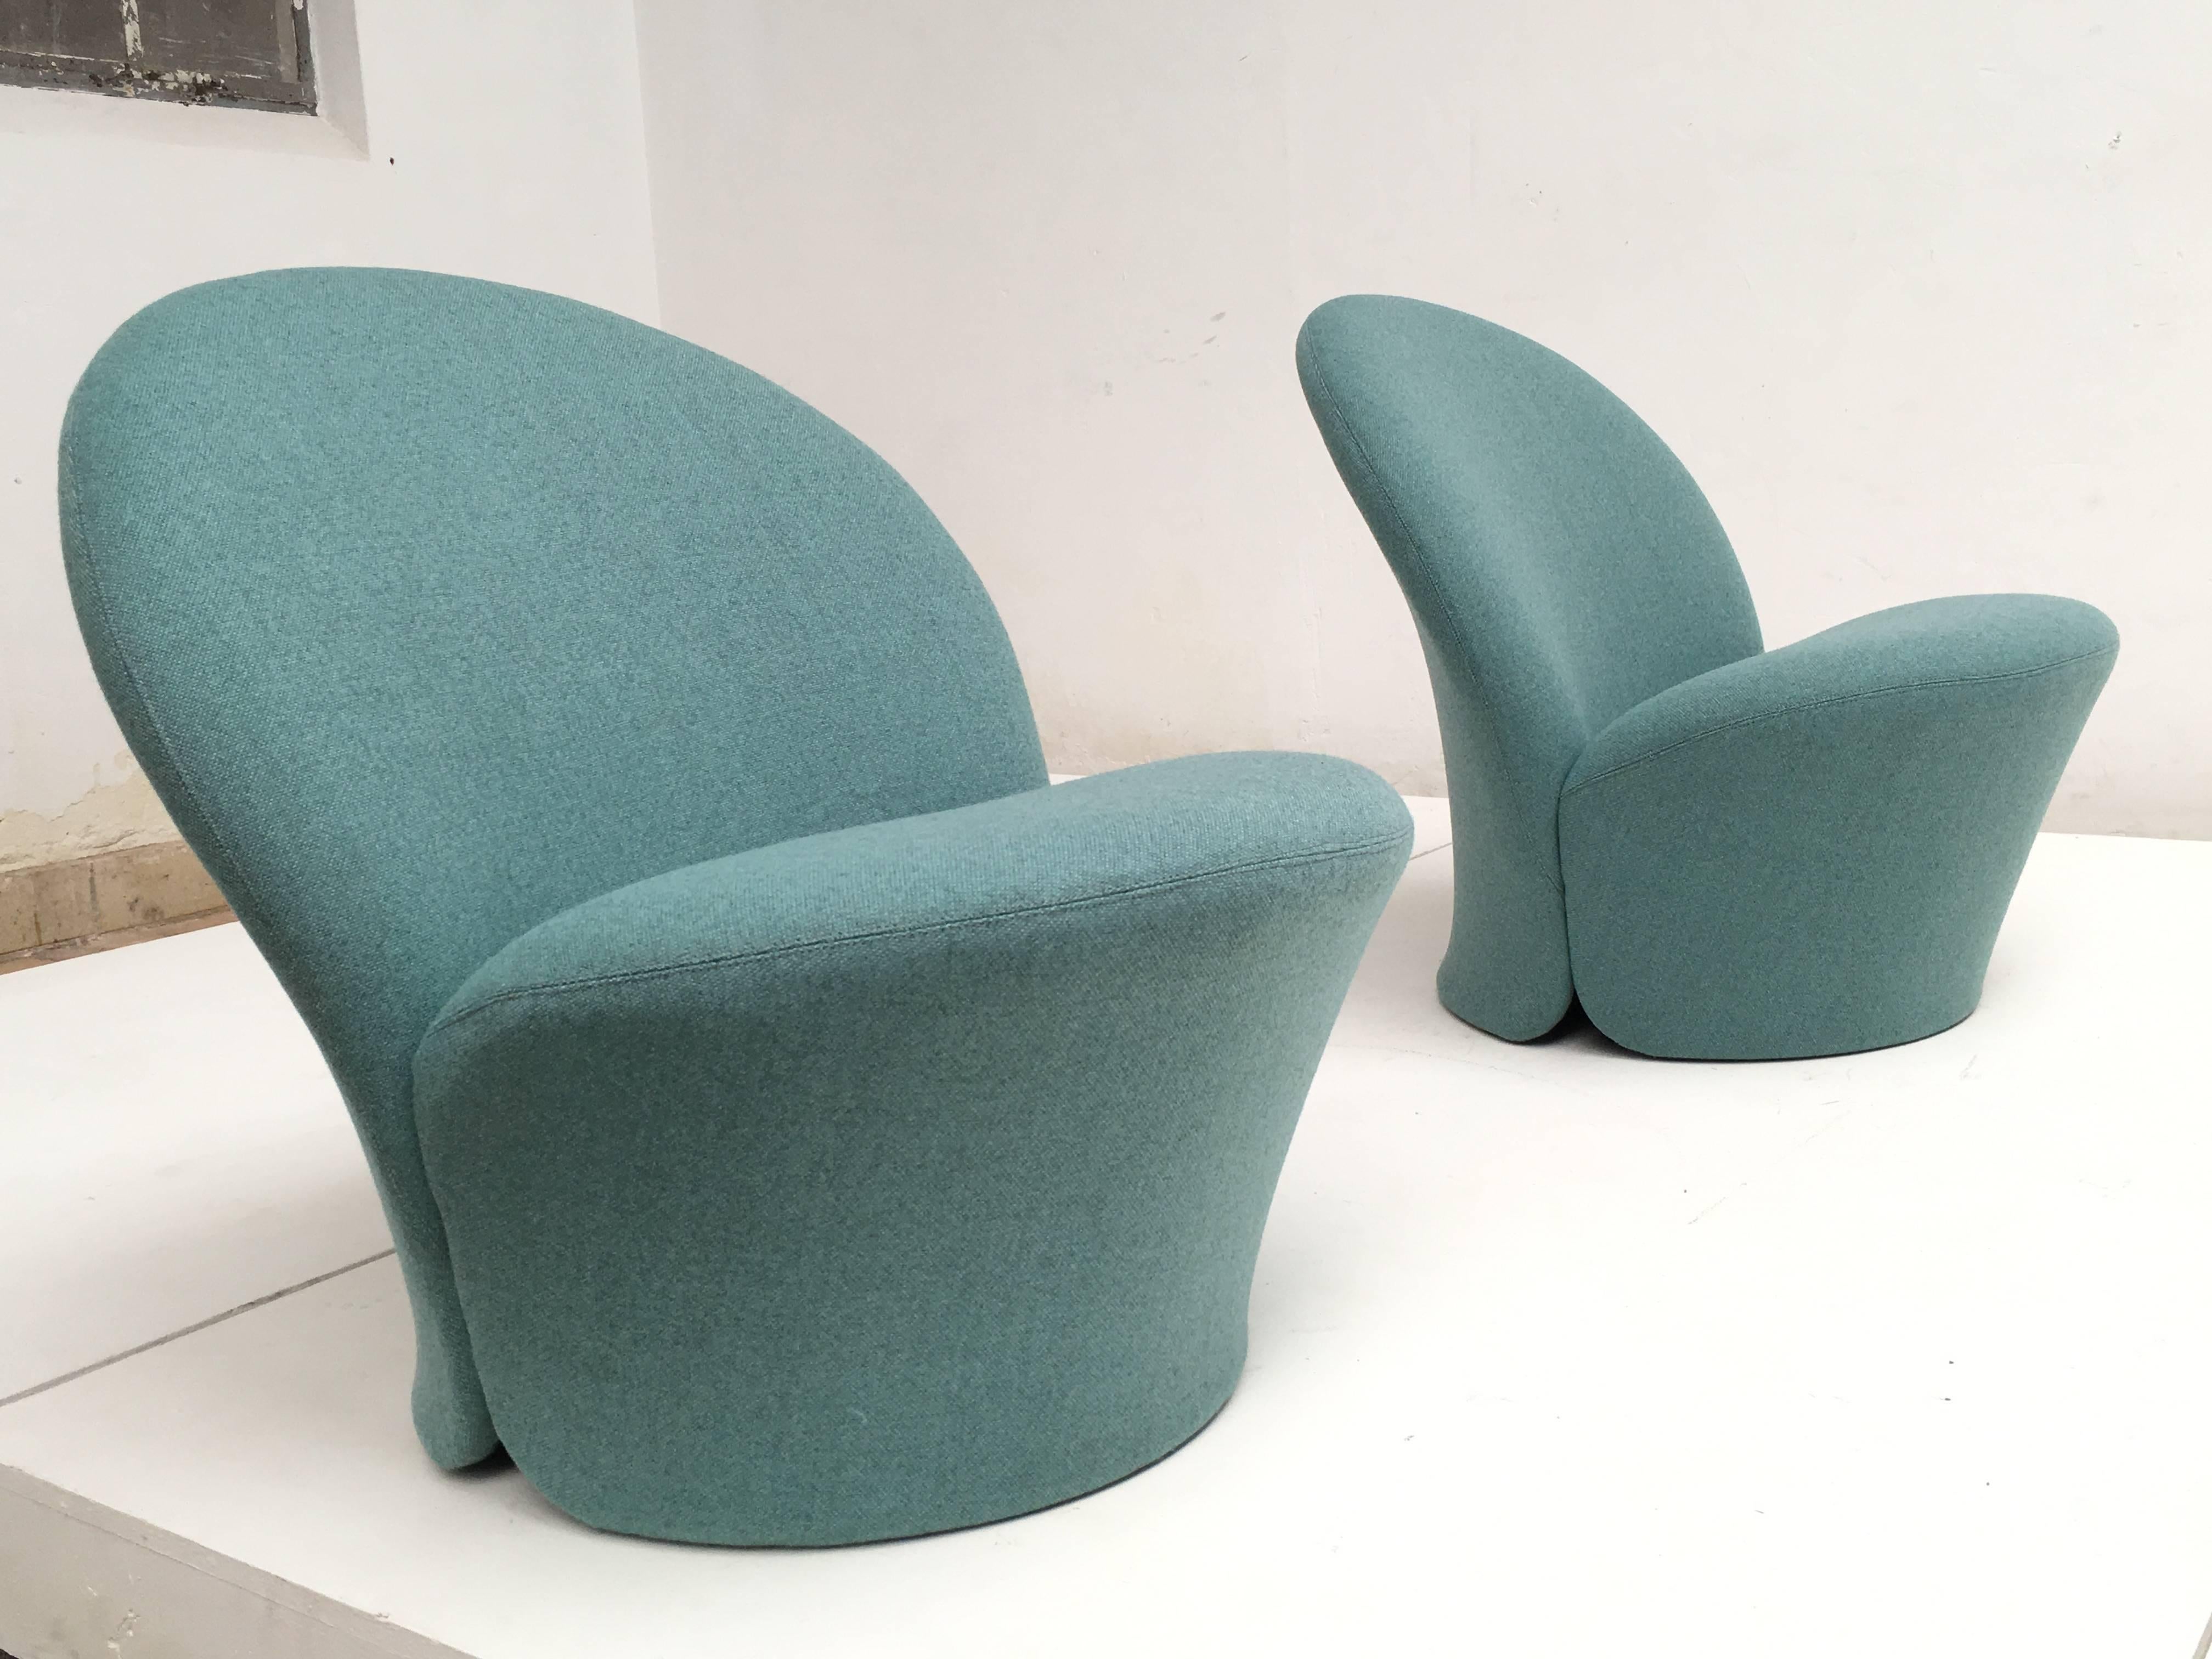 Pierre Paulin (1927-2009) created this F572 chairs for Artifort in 1967.

A perfect example of the groovy and organic shapes he used in many of his designs over his career as a designer.

The F572 was only produced for one year from 1967-1968 by